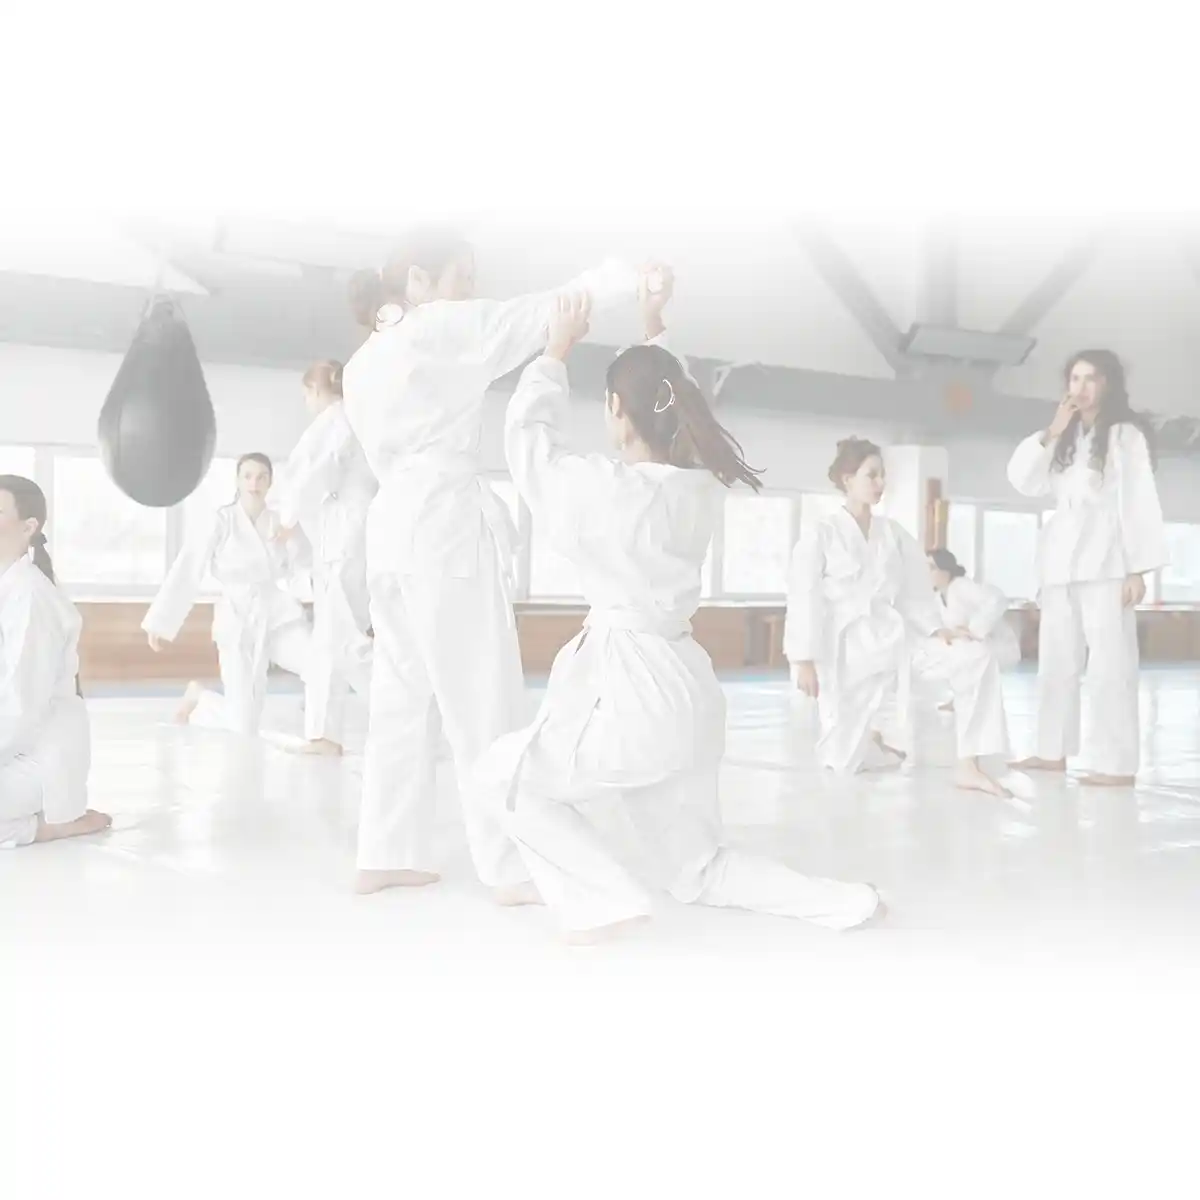 Martial Arts Classes for Ladies at the CMBBA